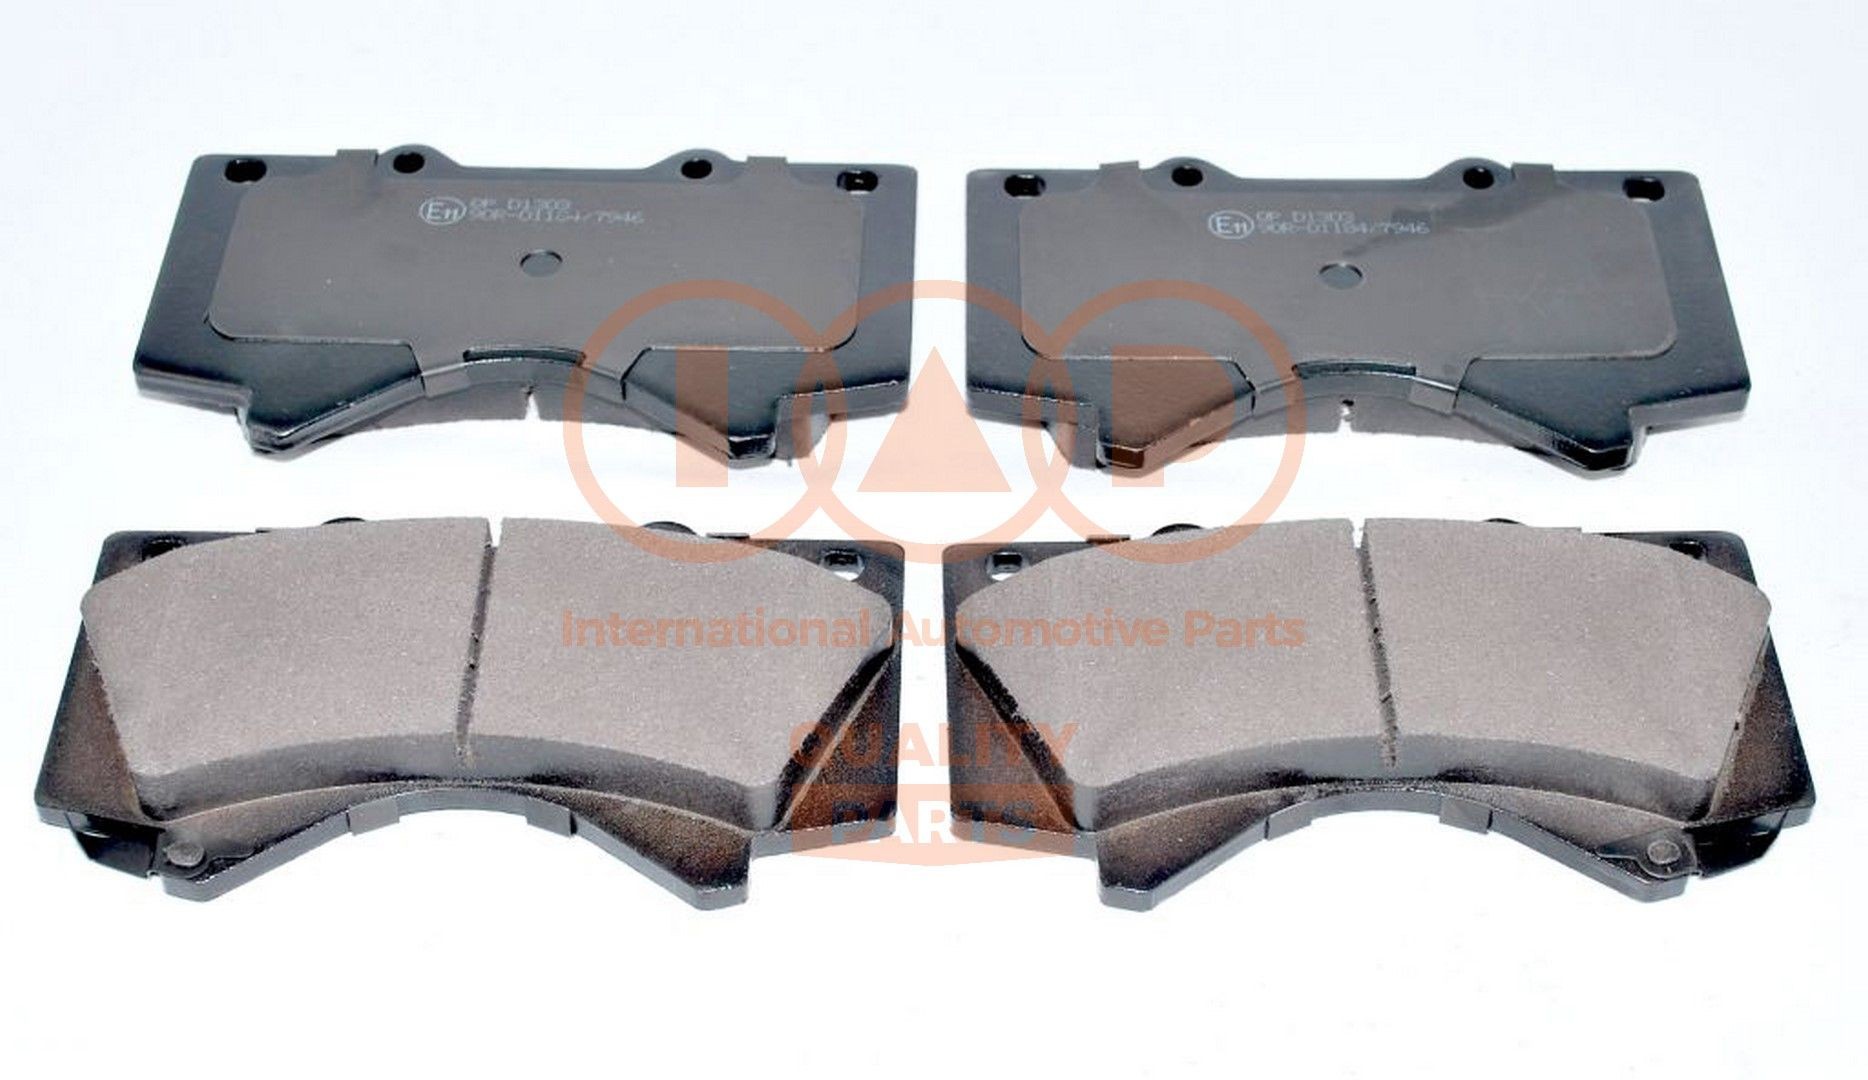 IAP QUALITY PARTS Front Axle Height 1: 83mm, Width 1: 143,6mm, Thickness 1: 17,9mm Brake pads 704-17210 buy